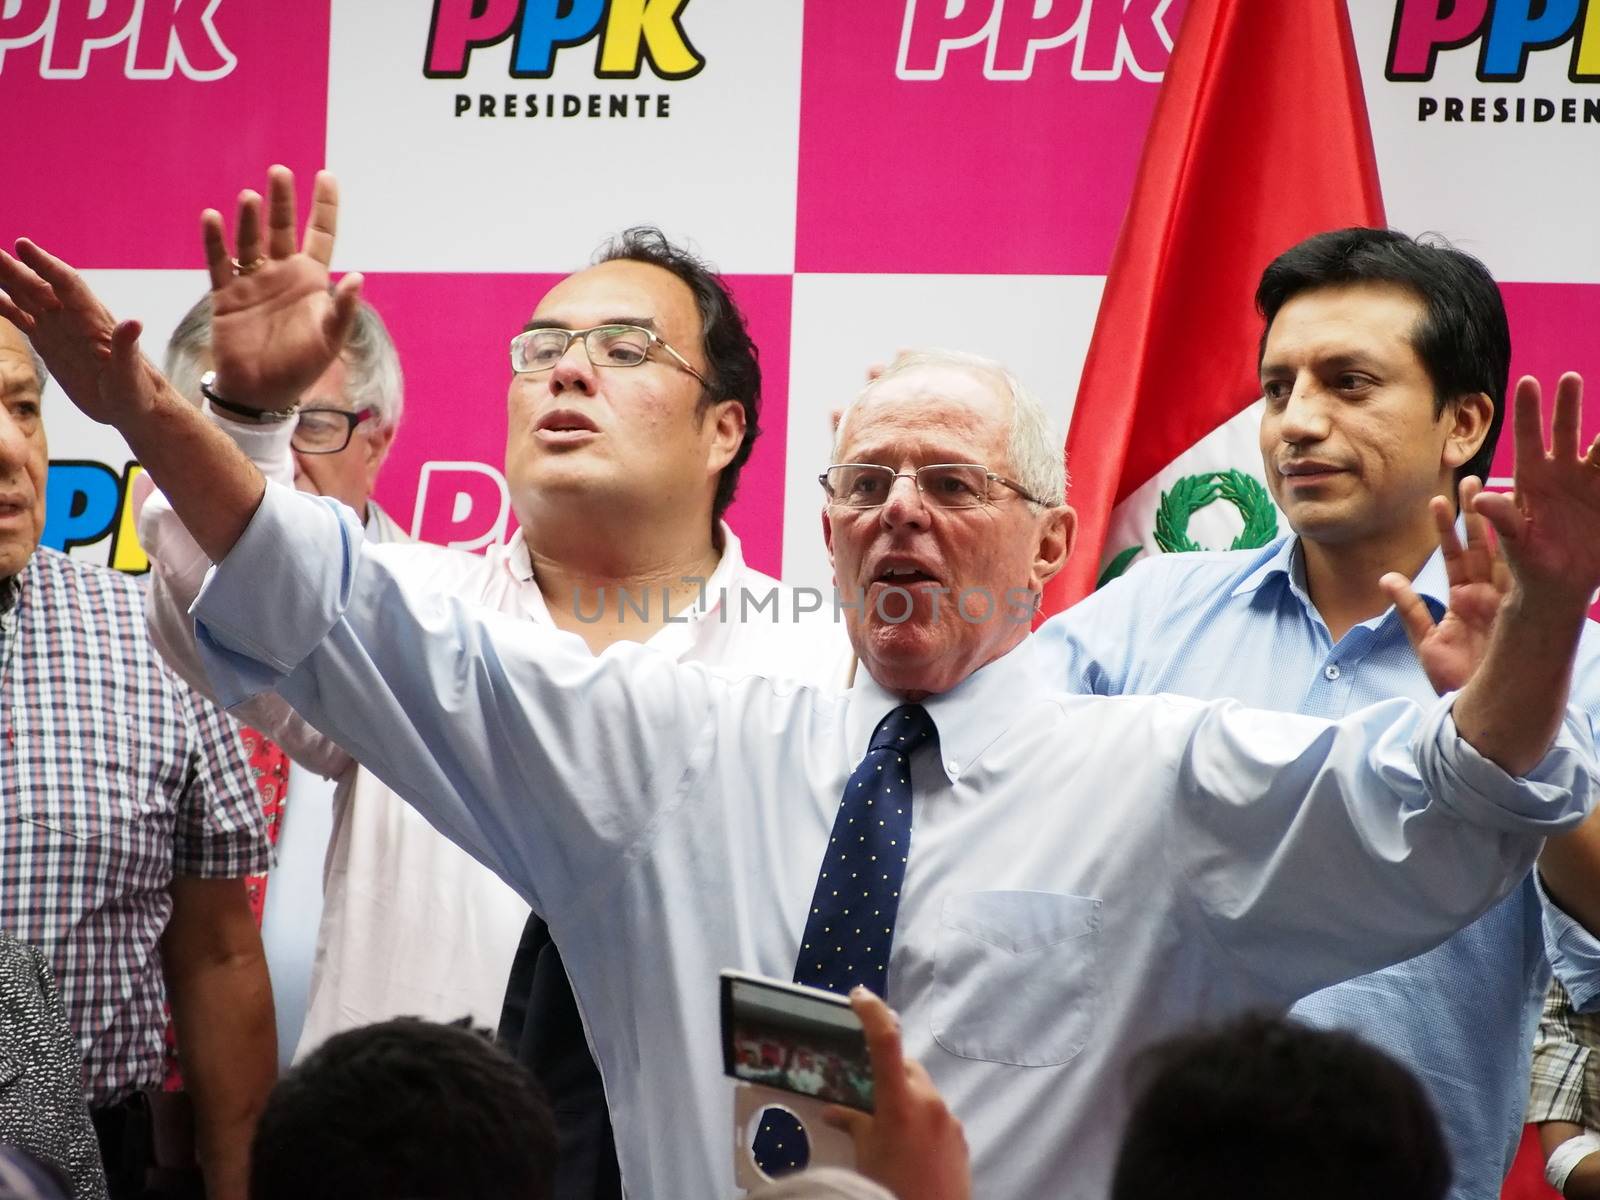 PERU, Lima: Peruvian presidential candidate for Peruanos por el Kambio (Peruvians for Change Party) and centre-right former World Bank economist Pedro Pablo Kuczynski meets with his supporters during a press conference as he was announced in the second place following the first round of Peru's Presidential Election, in Lima, Peru on April 10, 2016. The daughter of jailed former president Alberto Fujimori will face the veteran economist Pedro Pablo Kuczynski in the June run-off. 